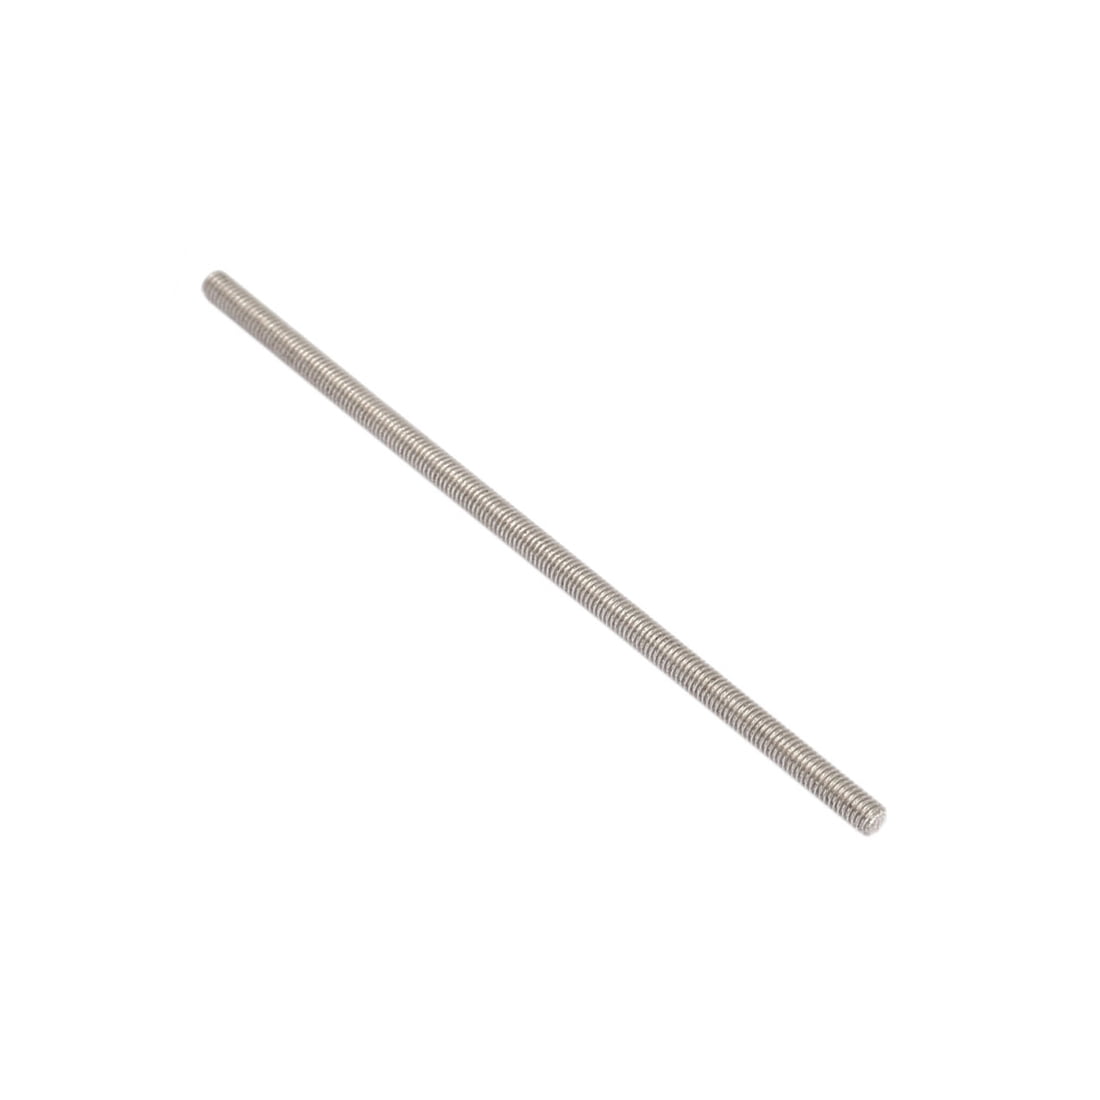 uxcell a16071500ux0021 M3 x 80mm 0.5mm Pitch 304 Stainless Steel Fully Threaded Rods Bar Studs Pack of 10 